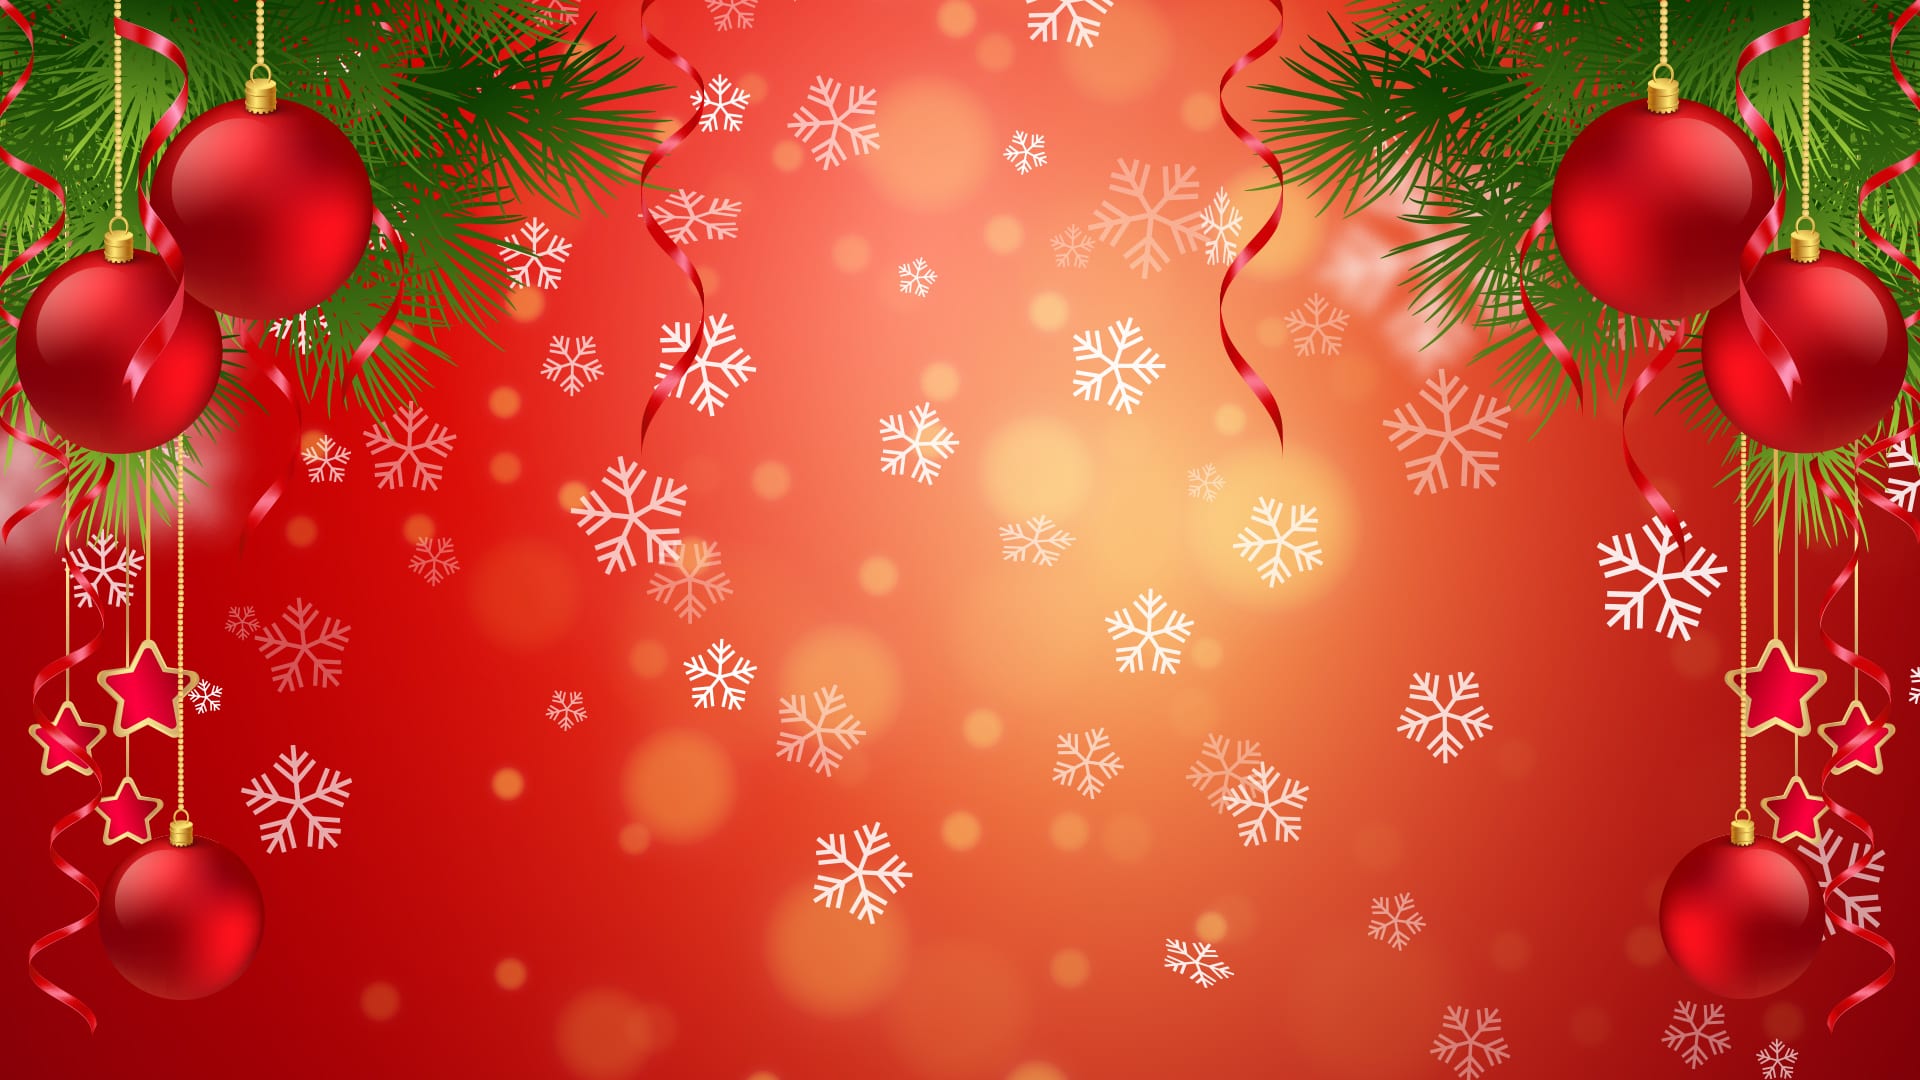 Christmas Tree Red Gold Christmas Background Images : Wallpapers13.com